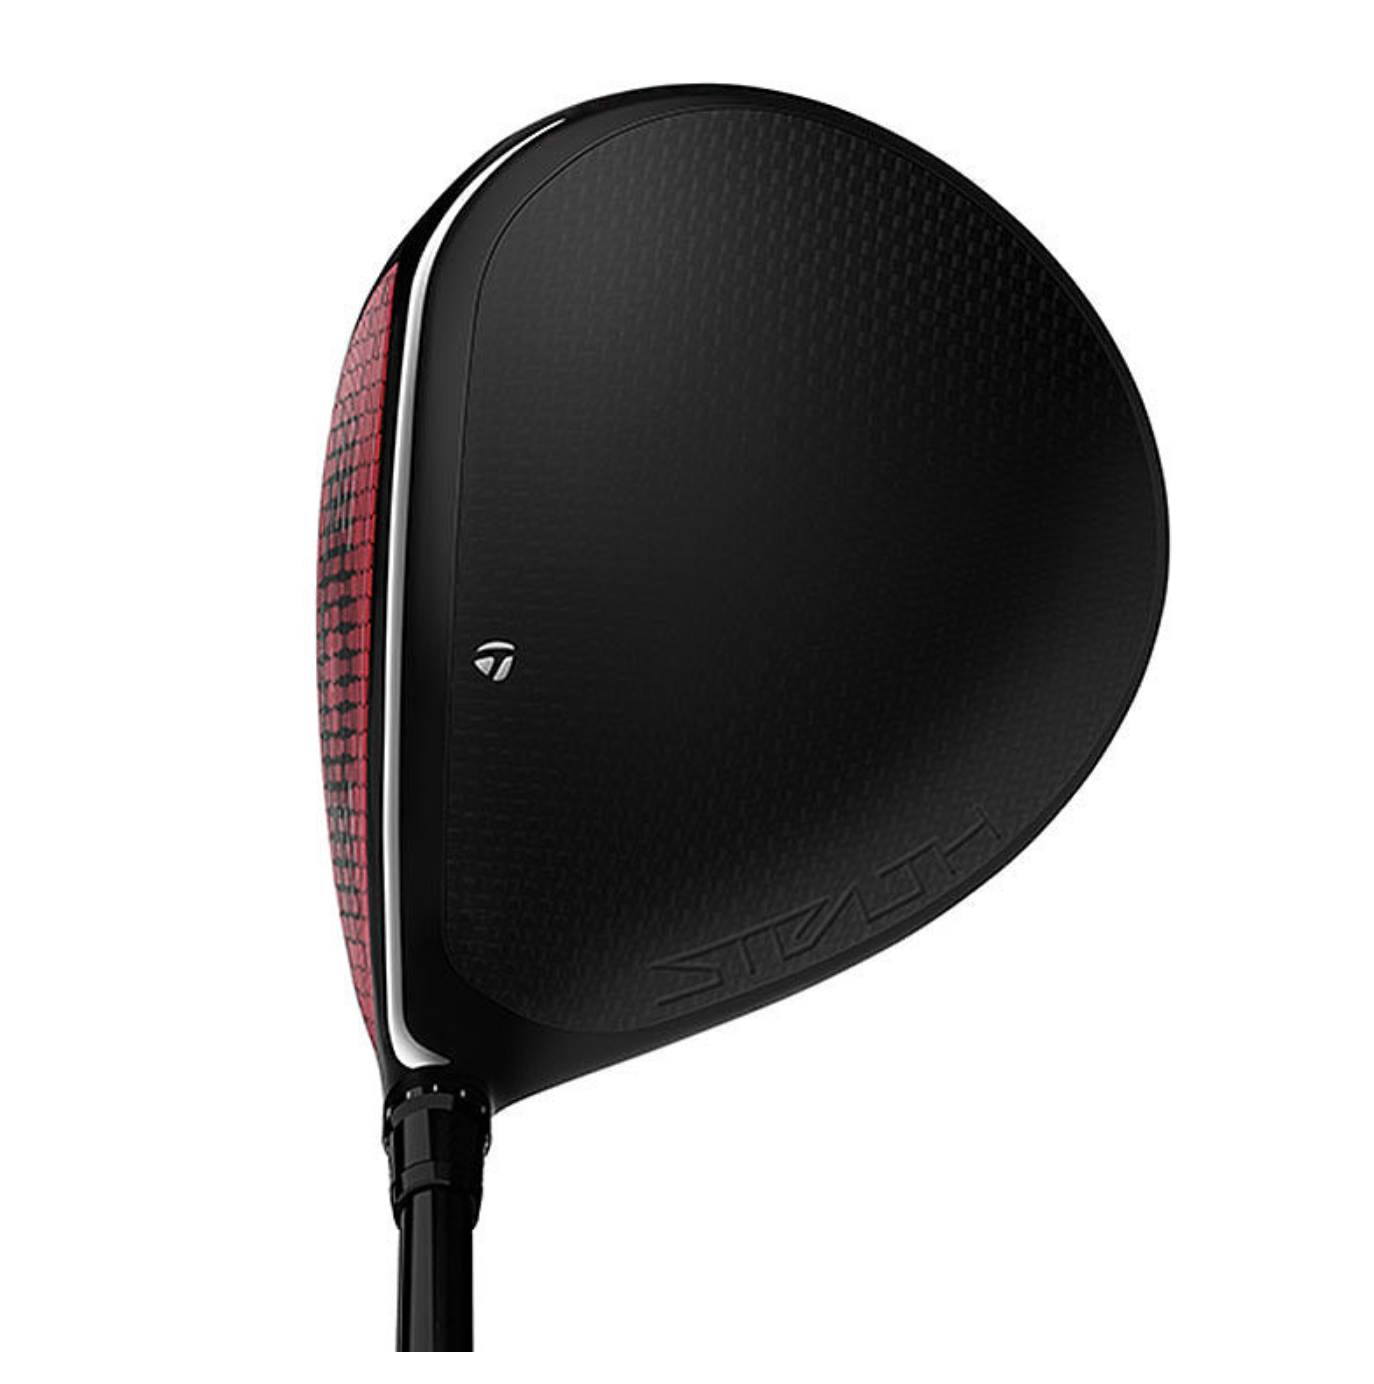 Taylormade | Stealth Plus Driver